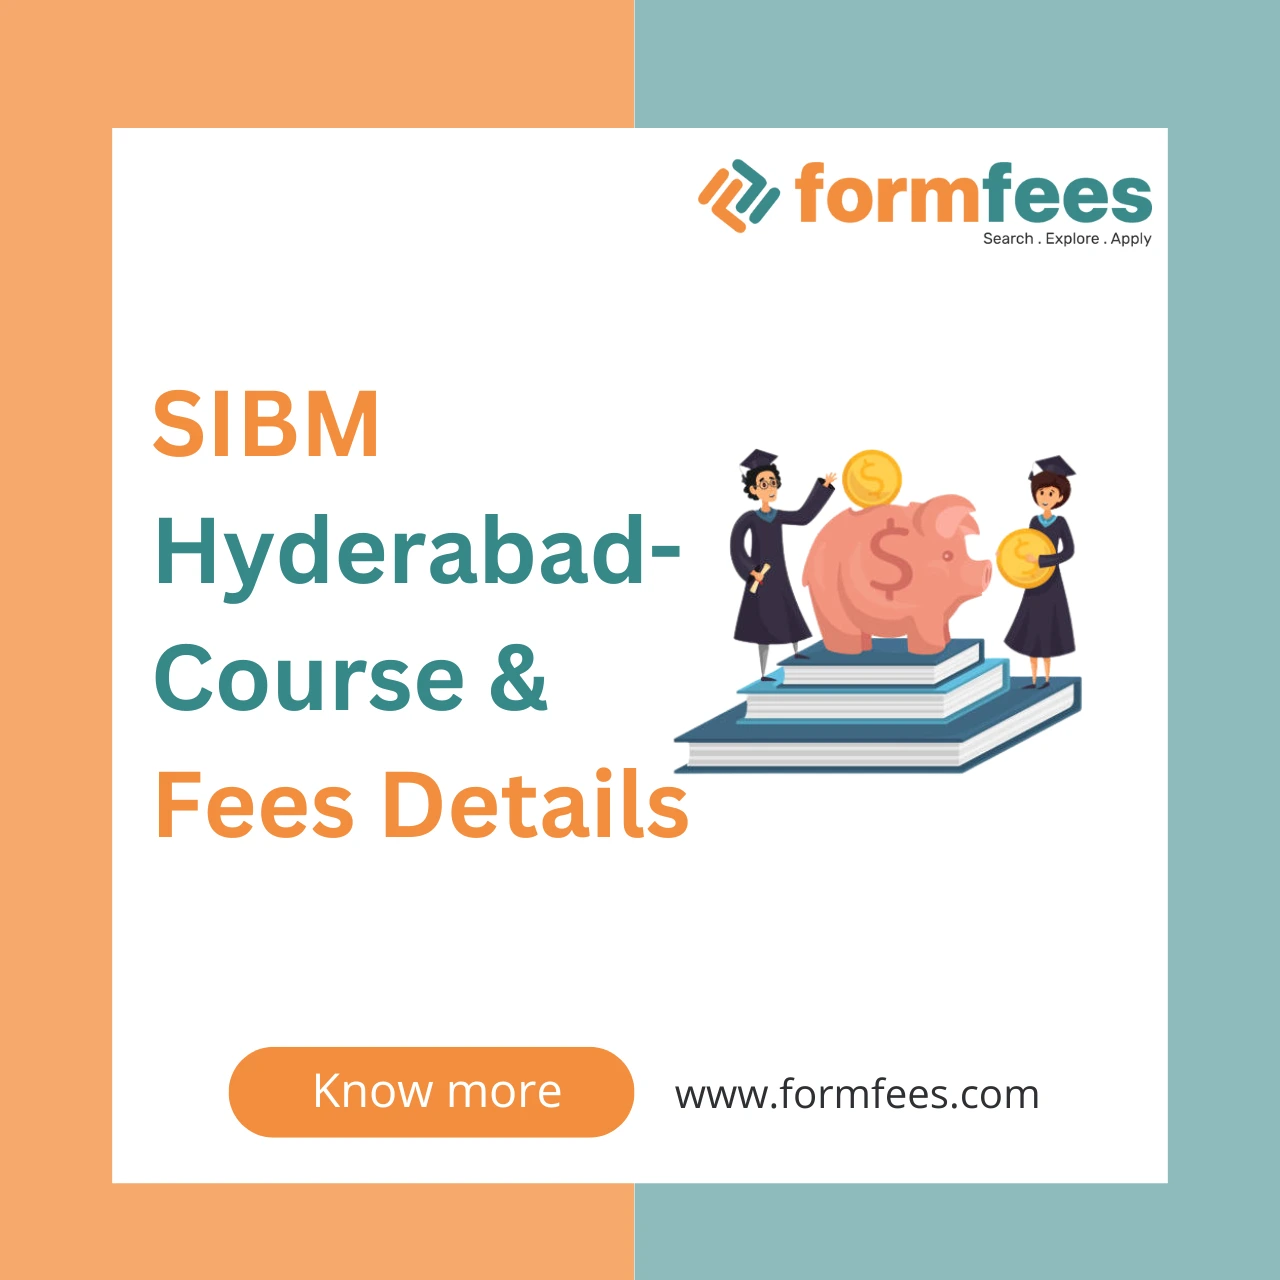 SIBM Hyderabad- Course & Fees Details